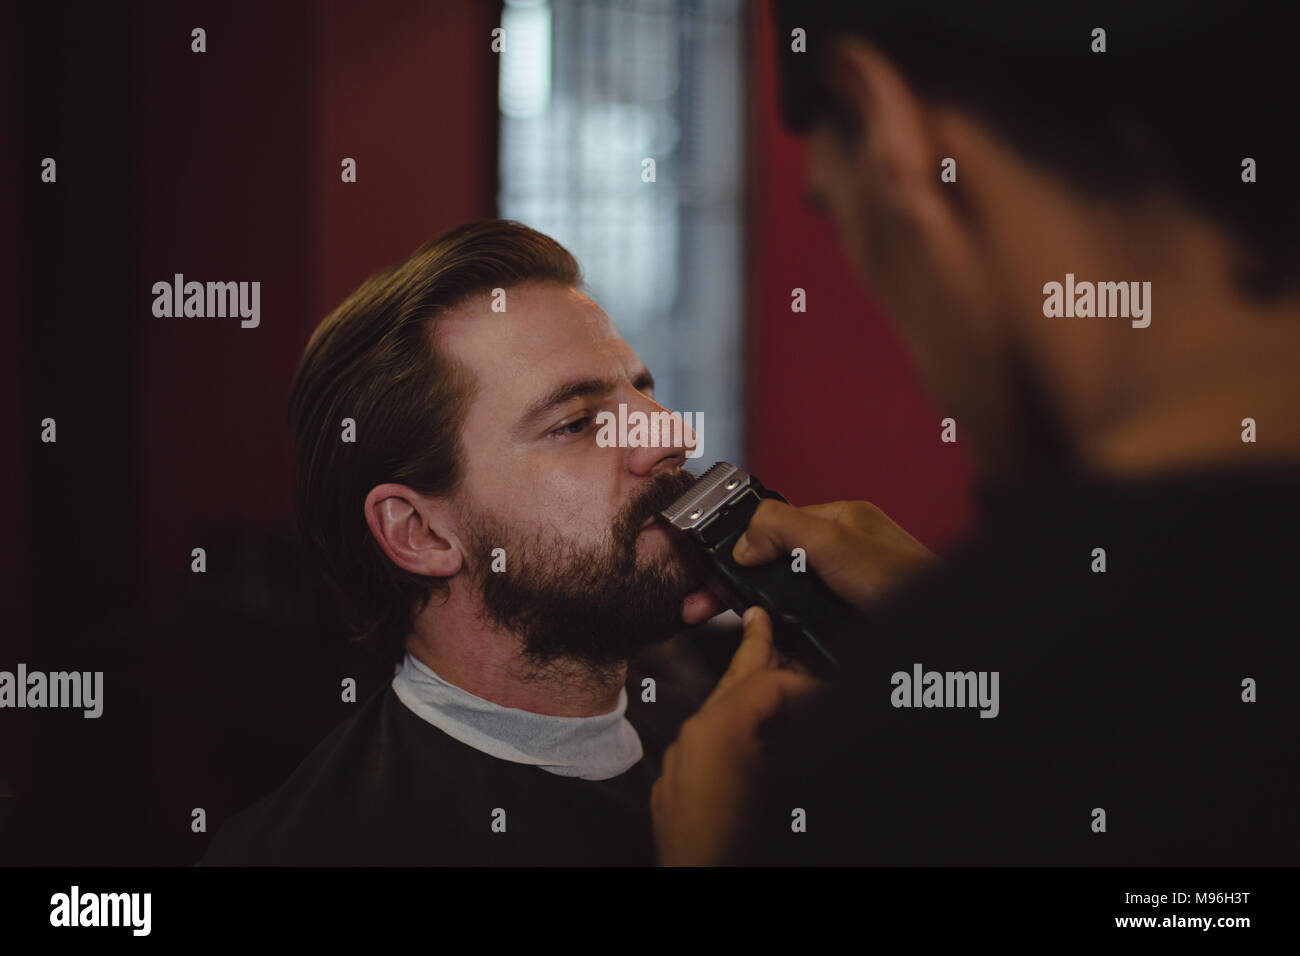 Man getting his beard trimmed with trimmer Stock Photo